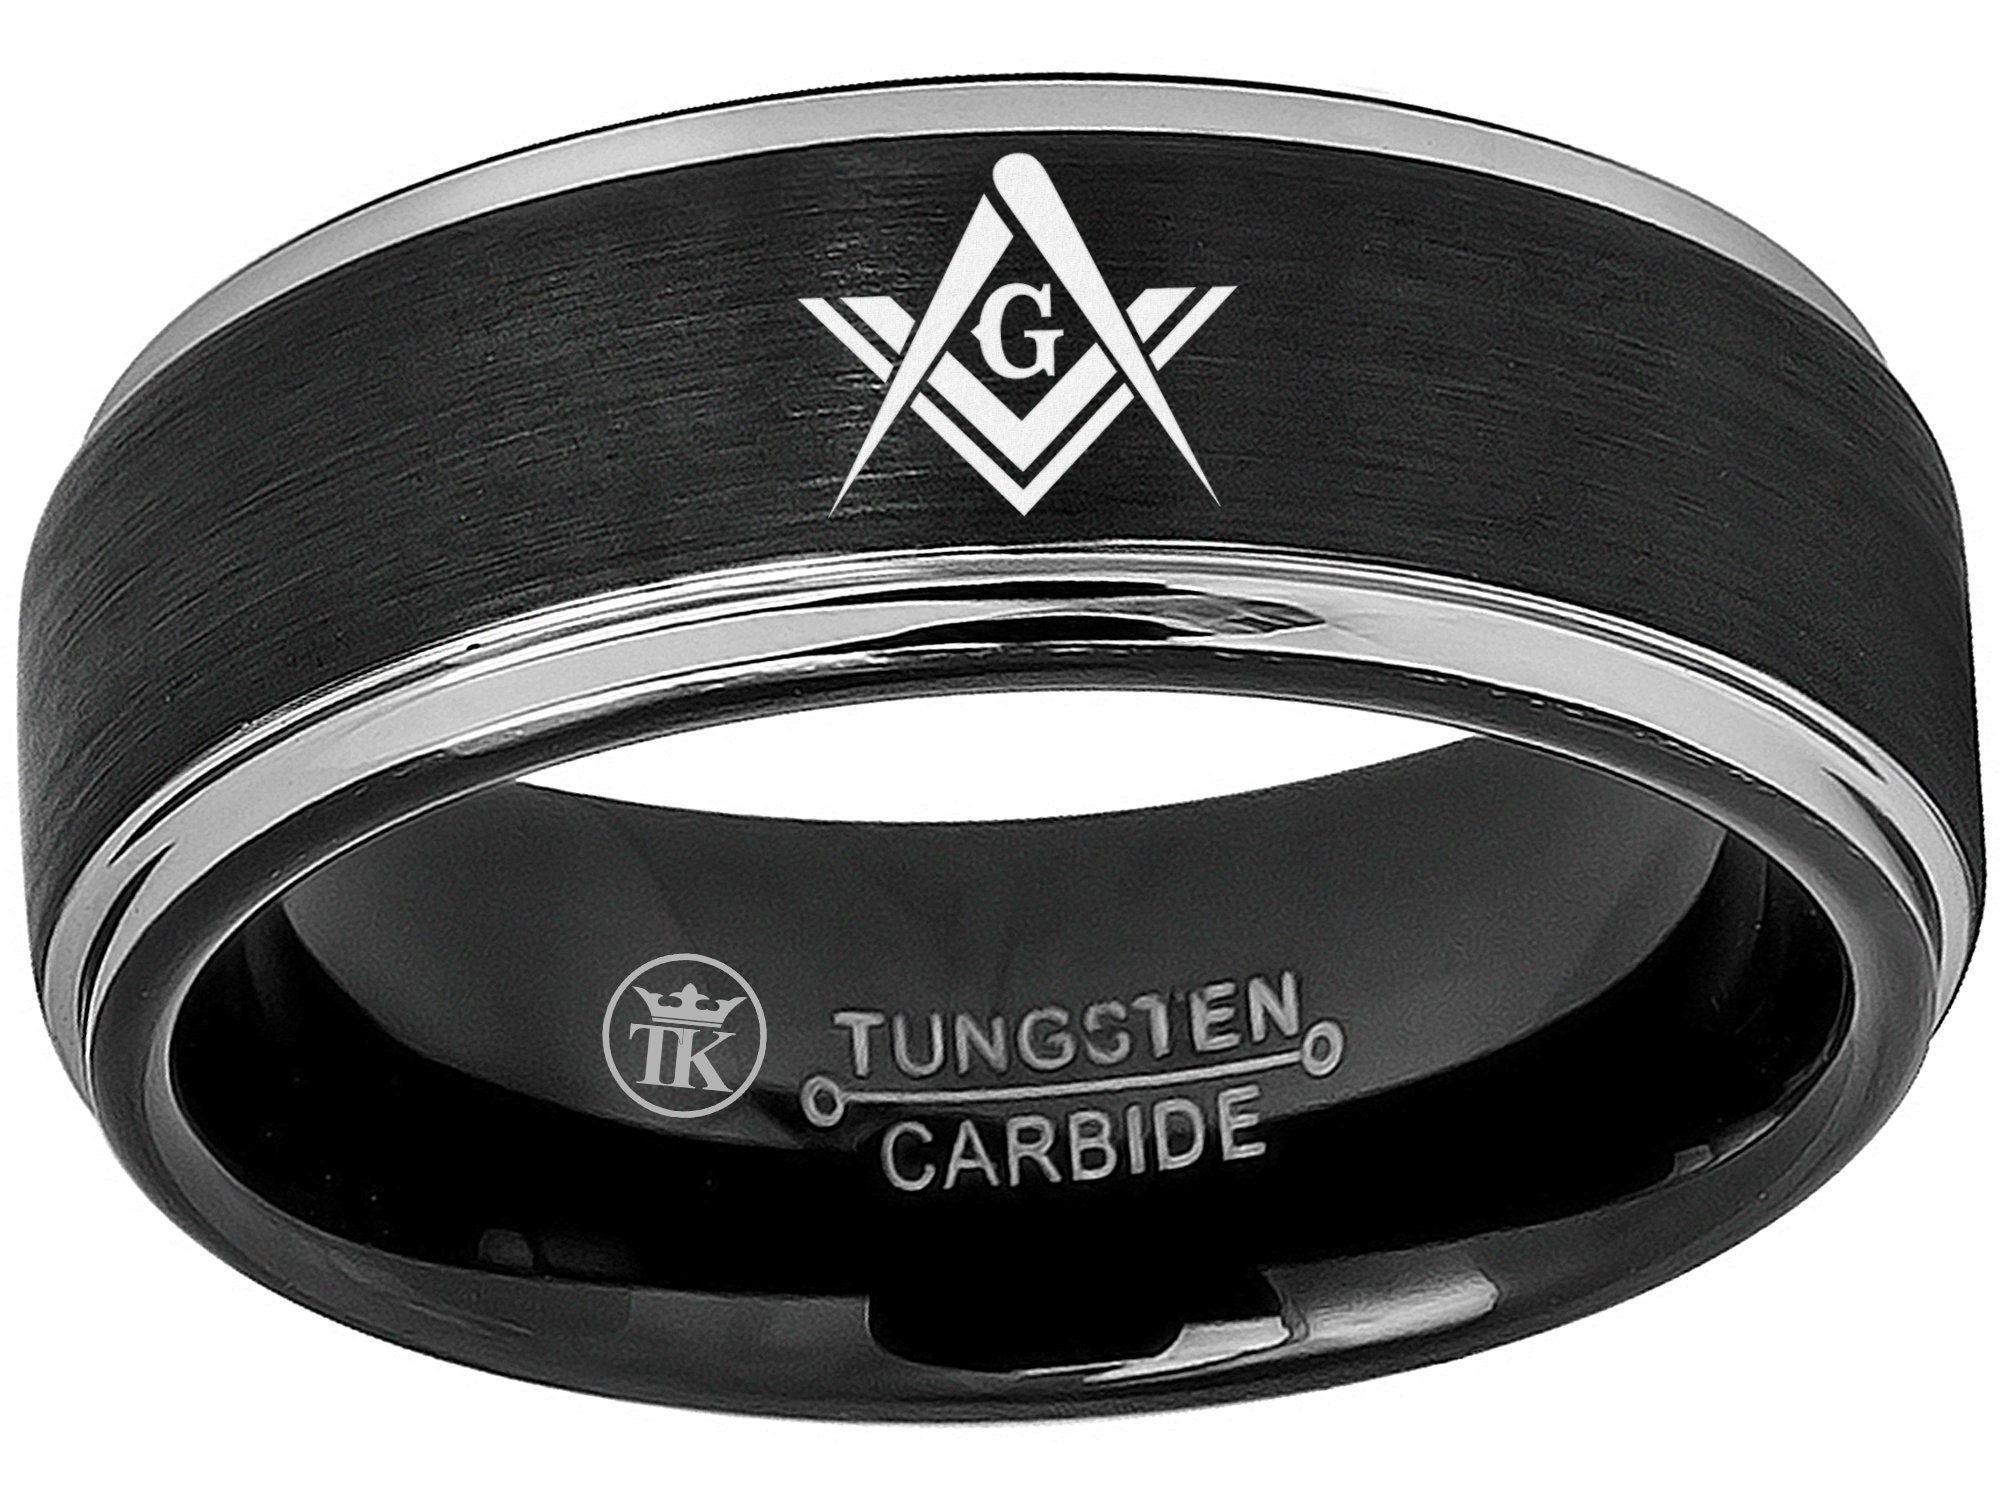 Tungsten King Two-Tone Black/Gun Metal Ion-Plated Brushed Center Masonic Compass Freemason Stepped Edge Comfort Fit Tungsten Carbide 8mm